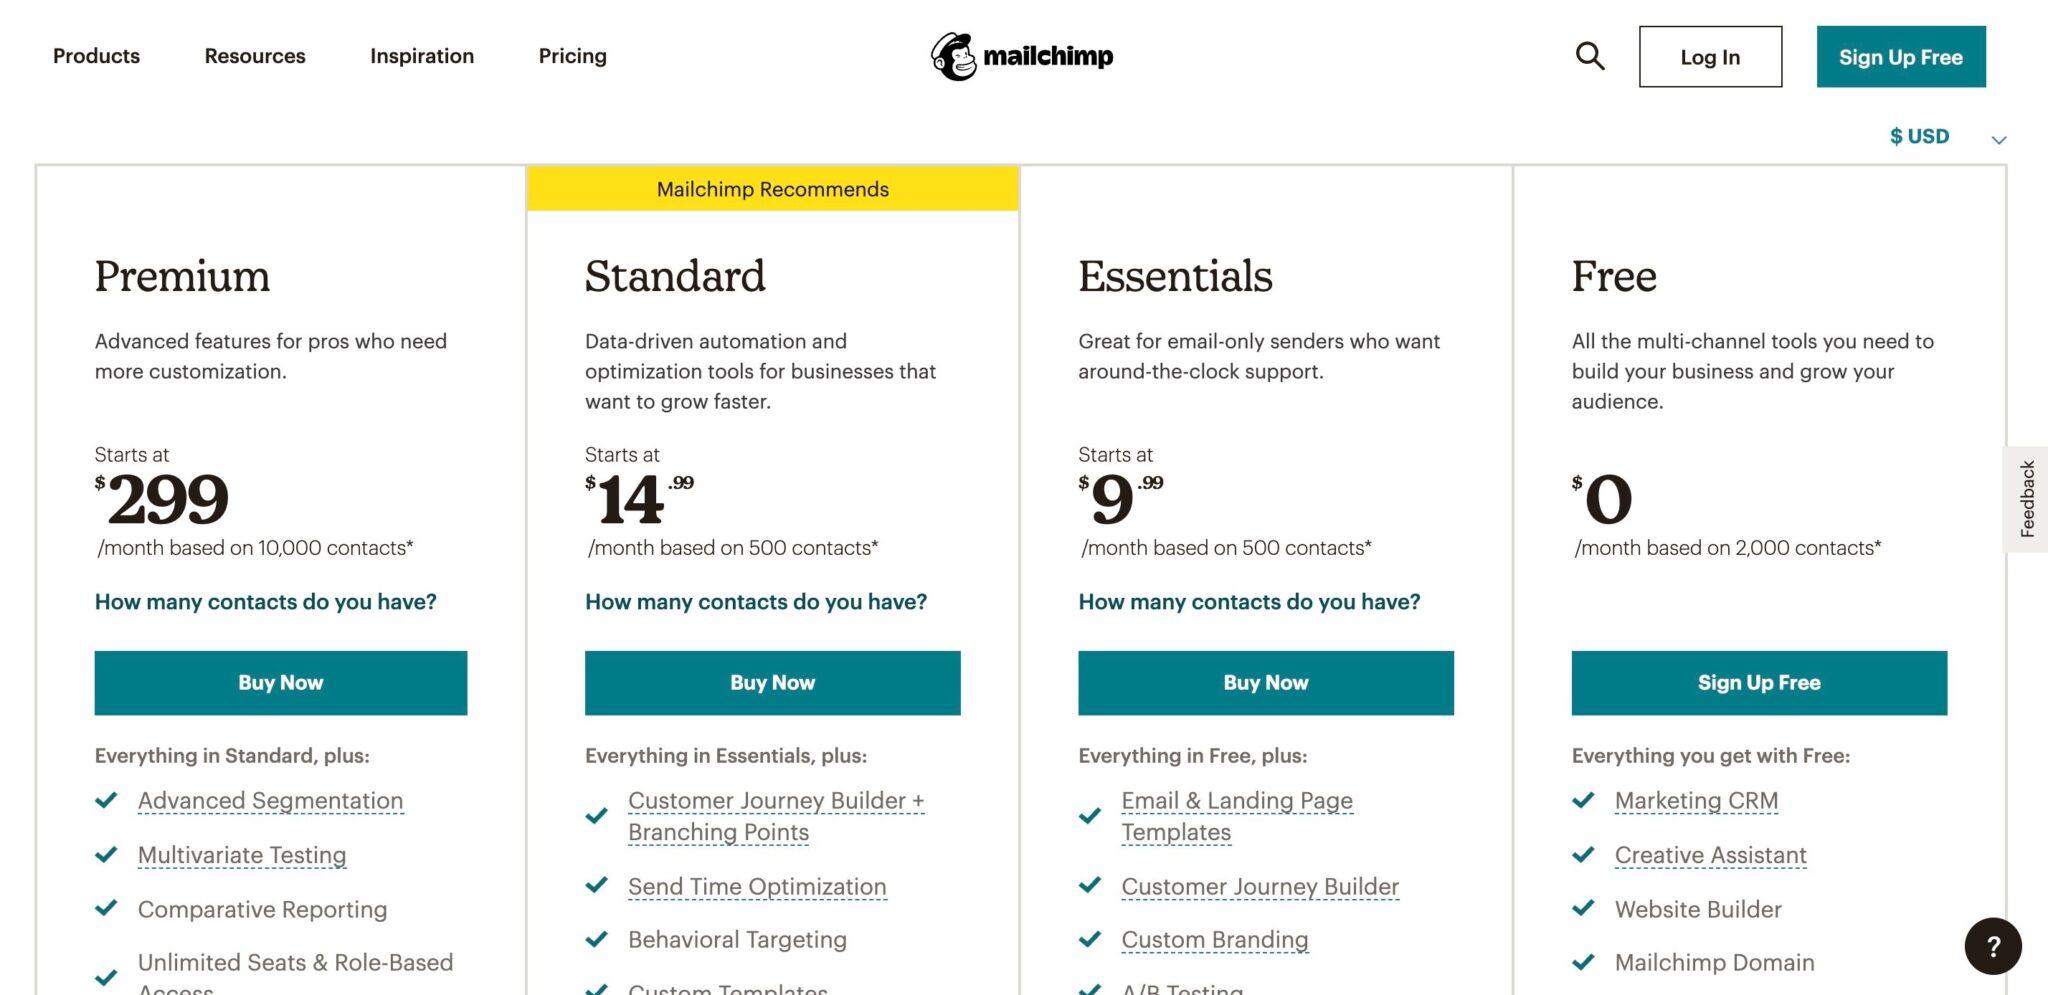 mailchimp offers 4 Pricing plans